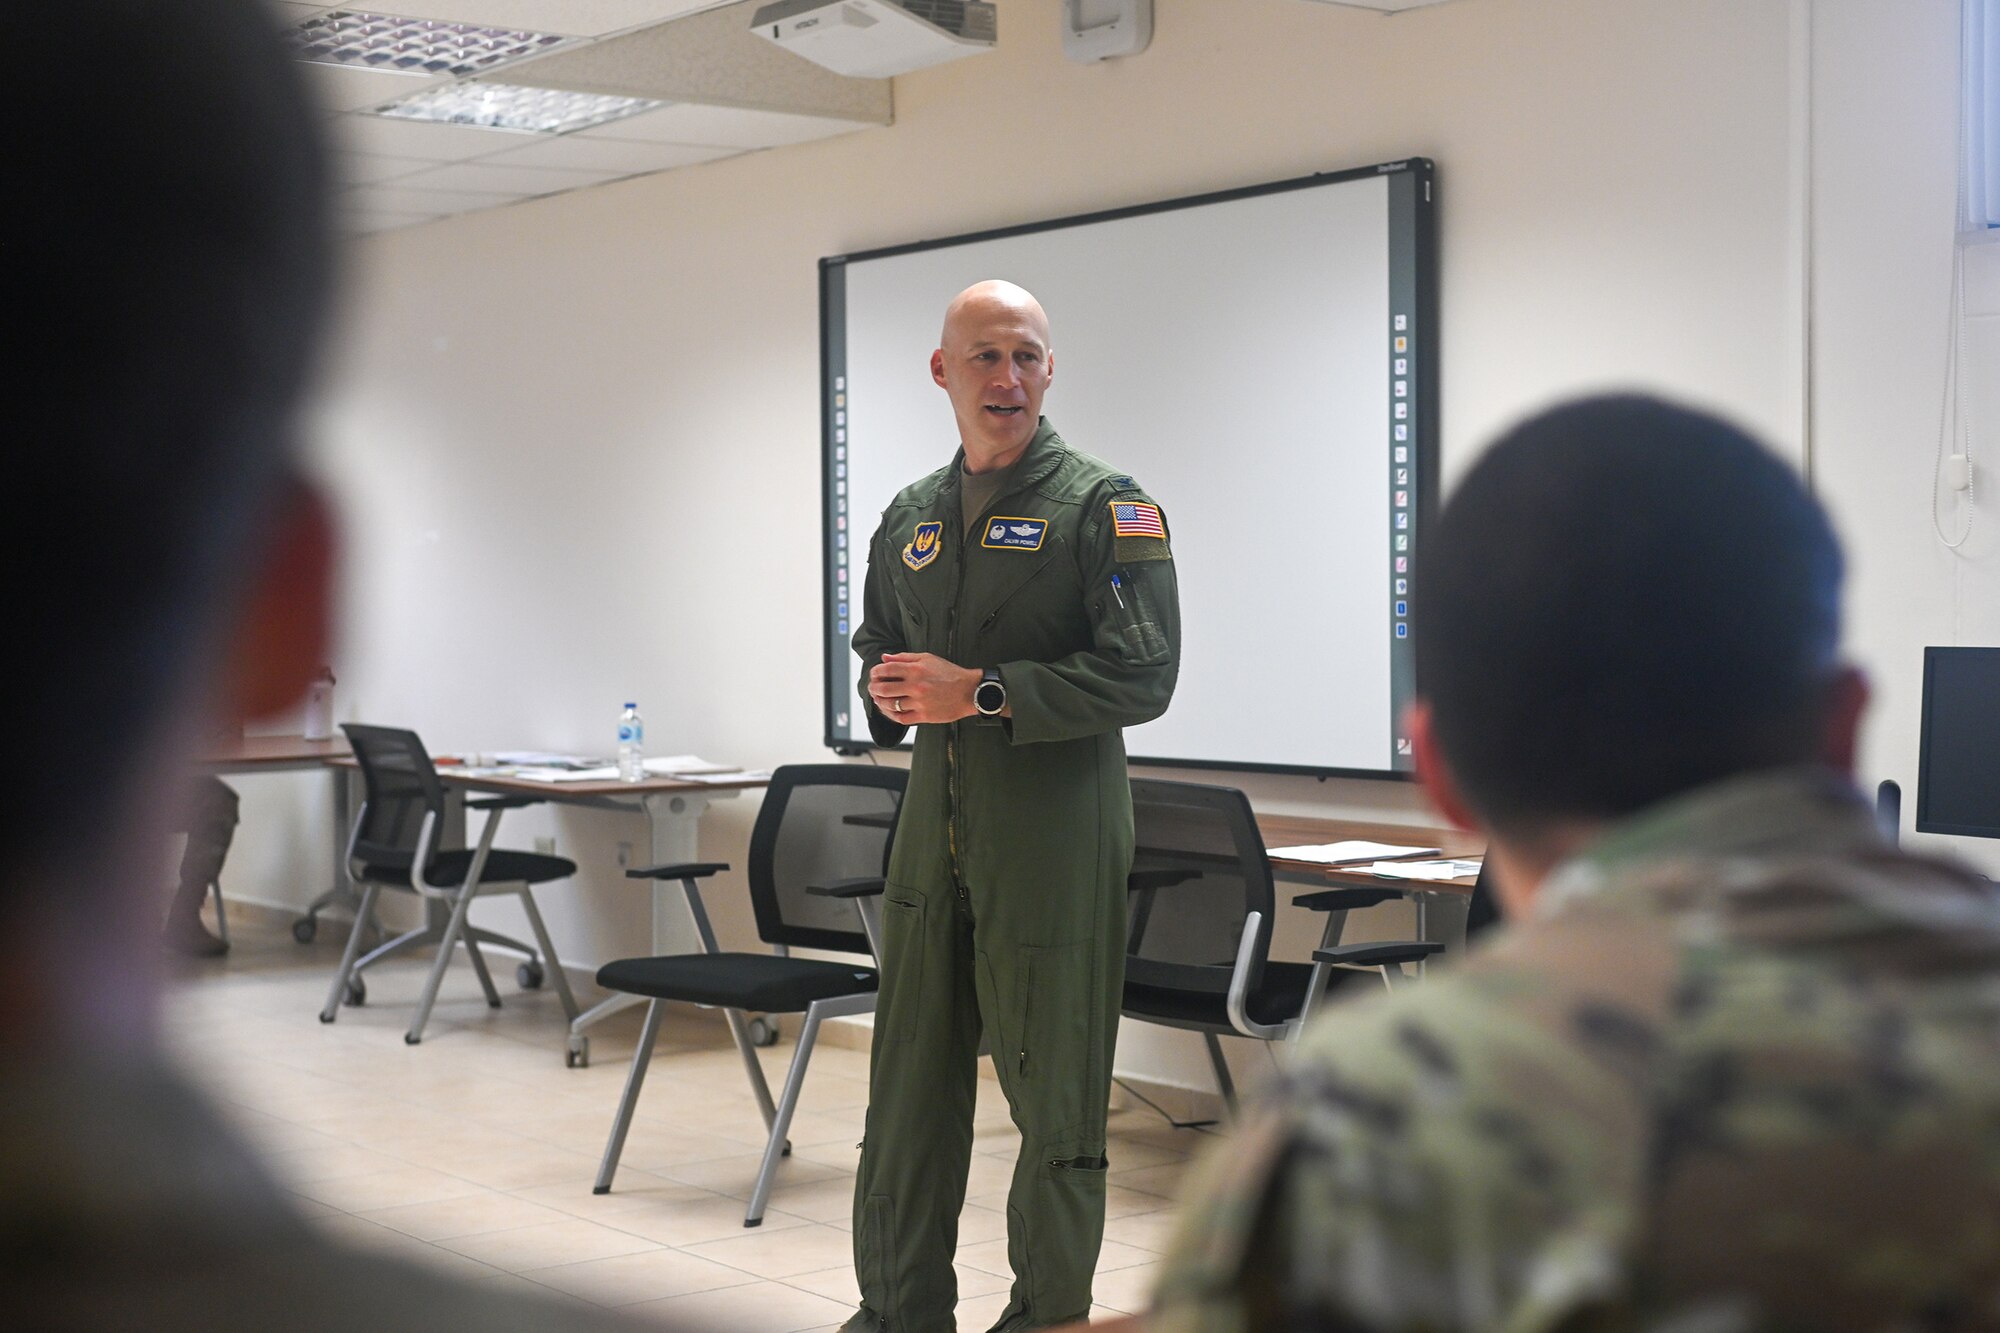 Col. Calvin Powell, 39th Air Base Wing commander, talks with First Term Airman Course (FTAC) students on Incirlik Air Base, Turkey, August 22, 2022.